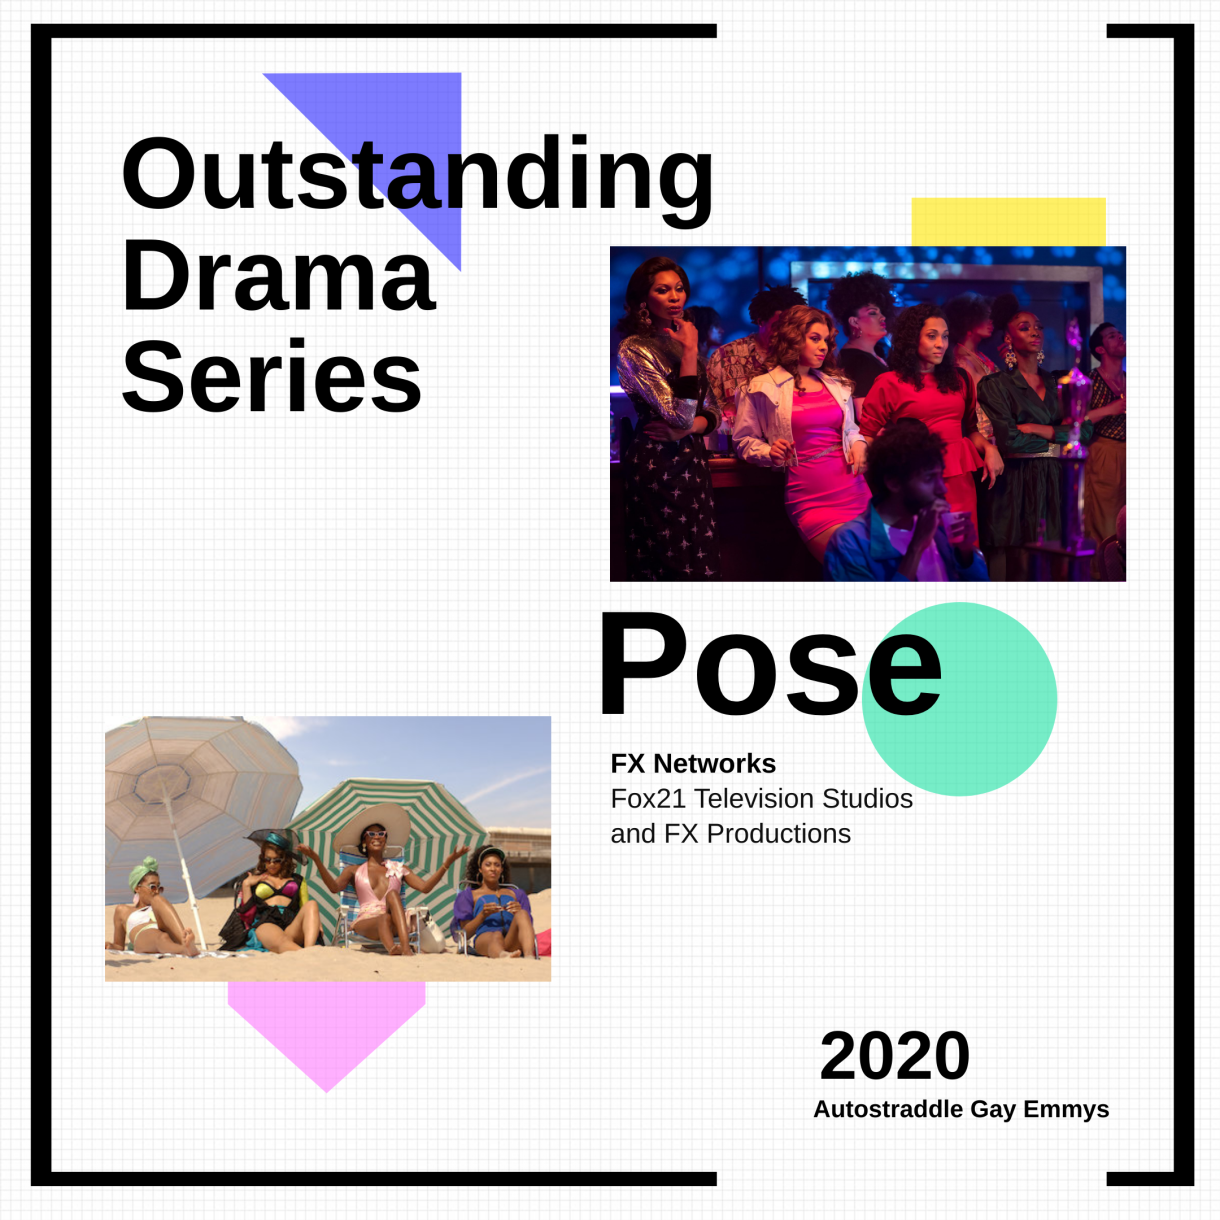 Outstanding Drama Series: Pose (FX Networks)